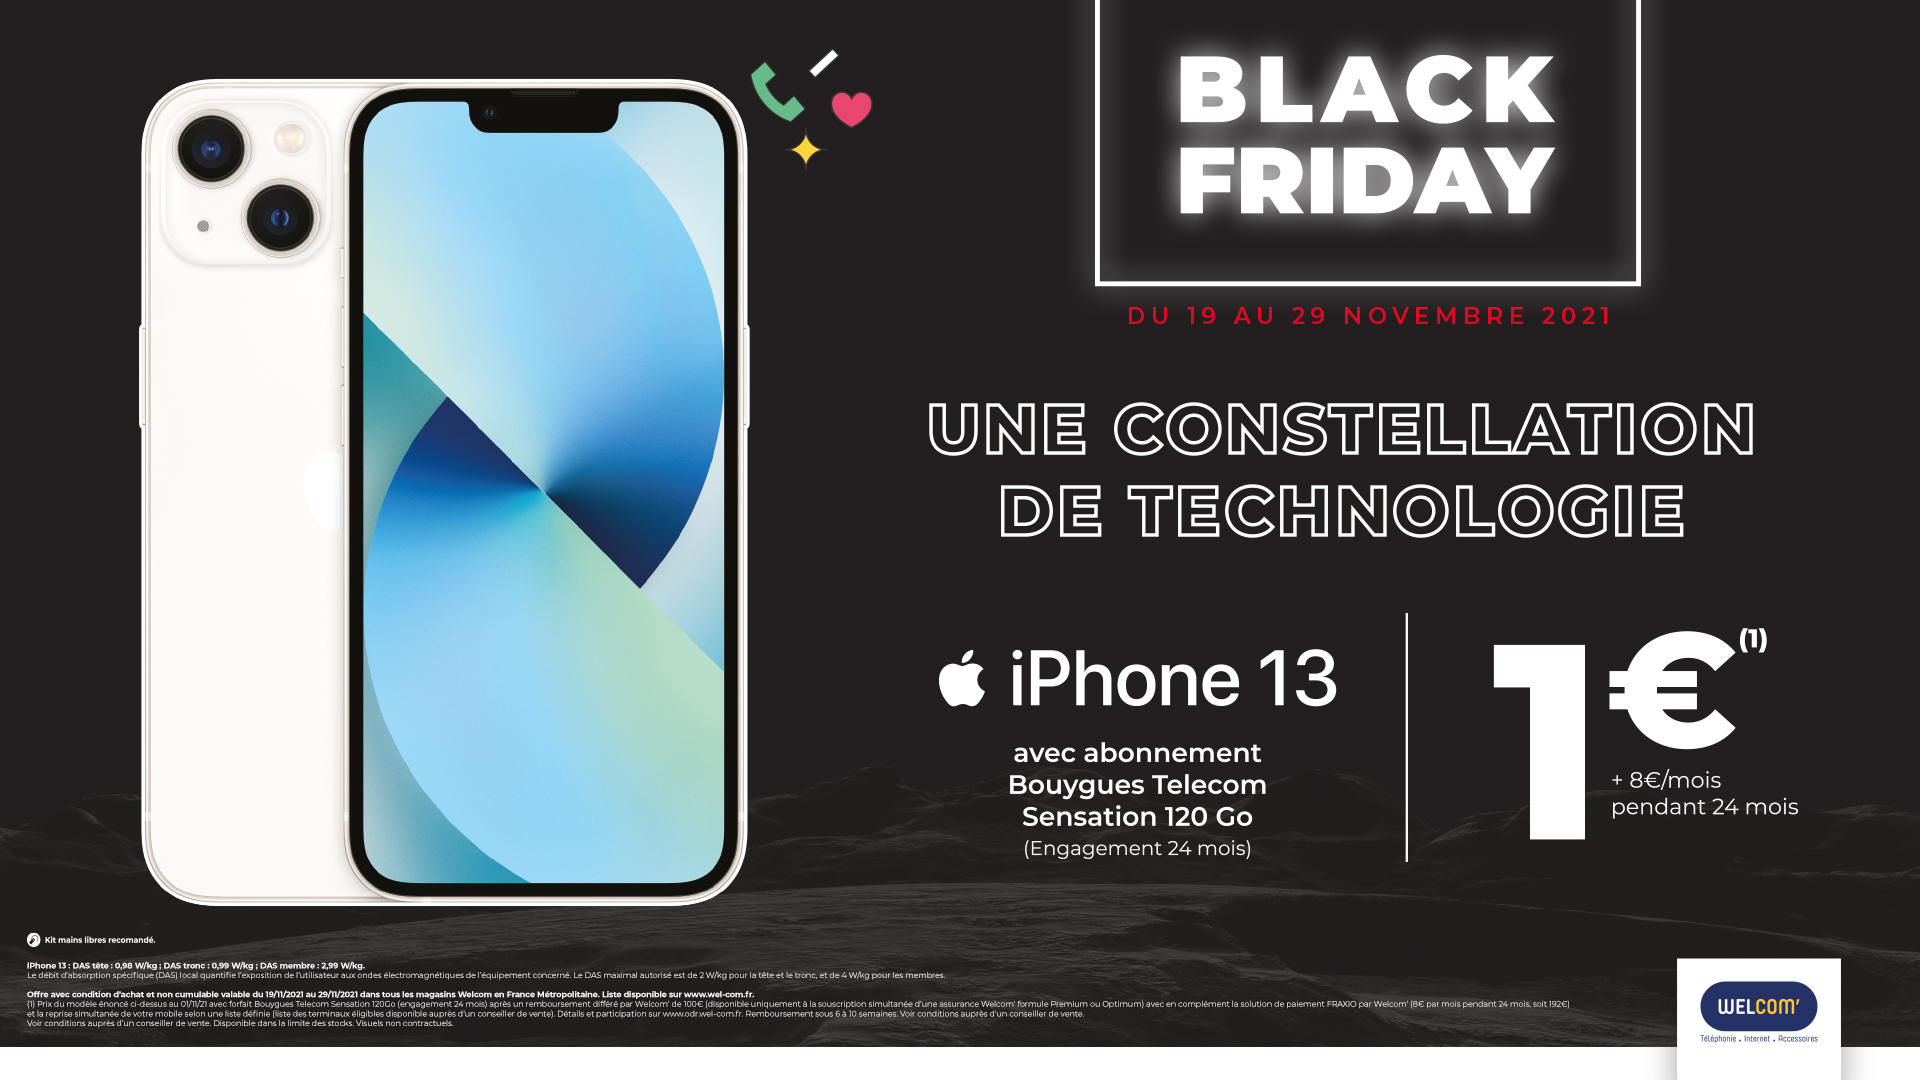 OFFRES-DIFFUSION-TV-BLACK-FRIDAY-IPHONE13.jpg